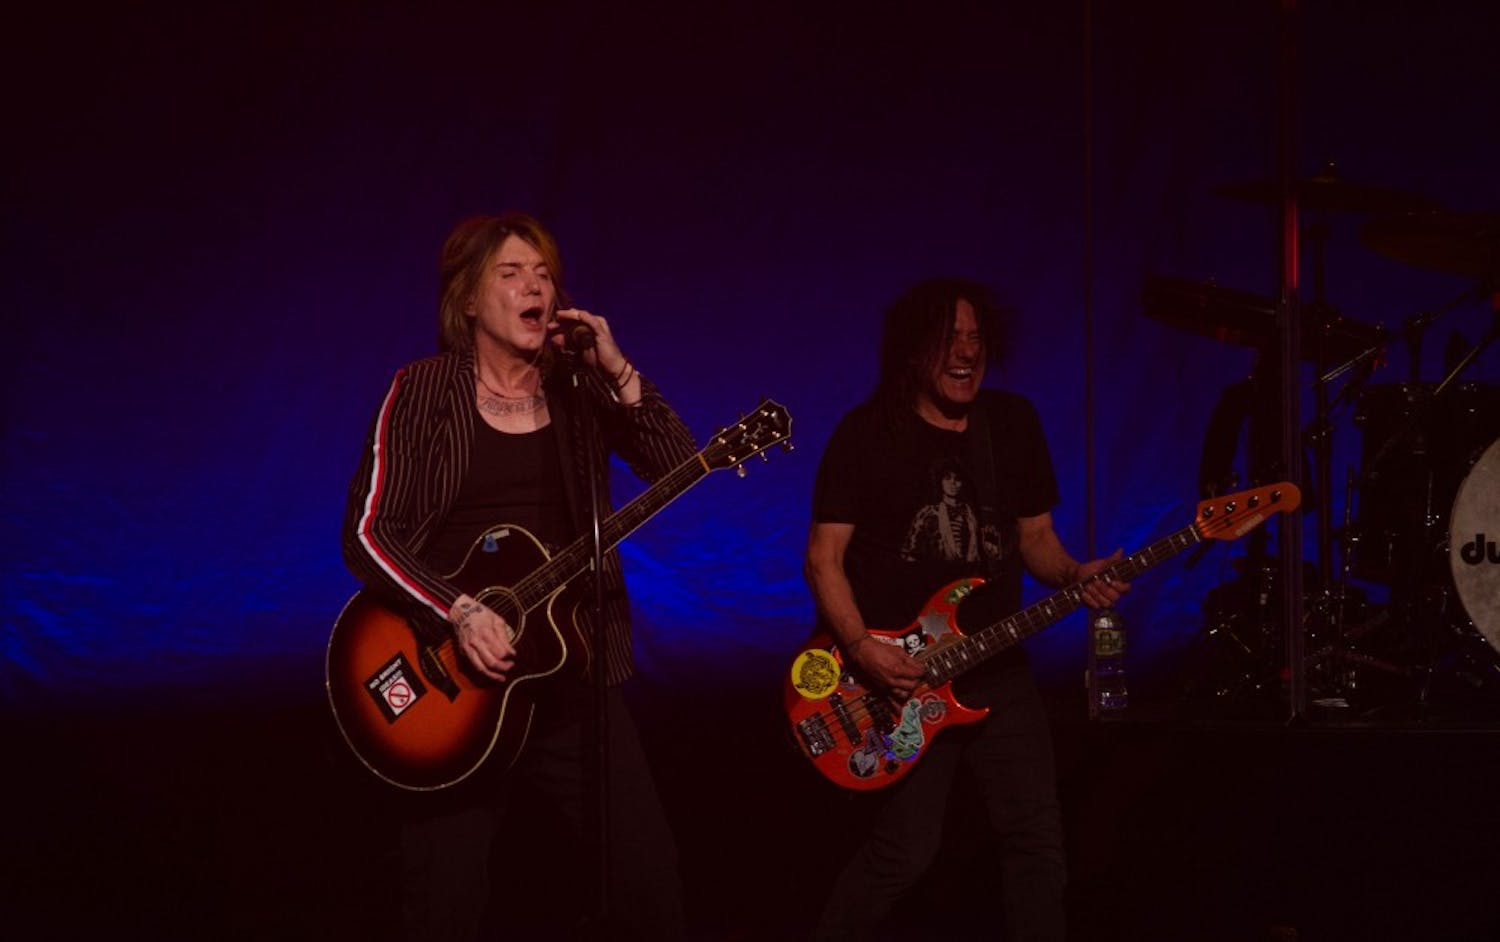 The Goo Goo Dolls played their first of three sold-out shows Friday at Shea’s Performing Arts Center. The band is celebrating the 20th anniversary of their hit album “Dizzy Up the Girl.”&nbsp;